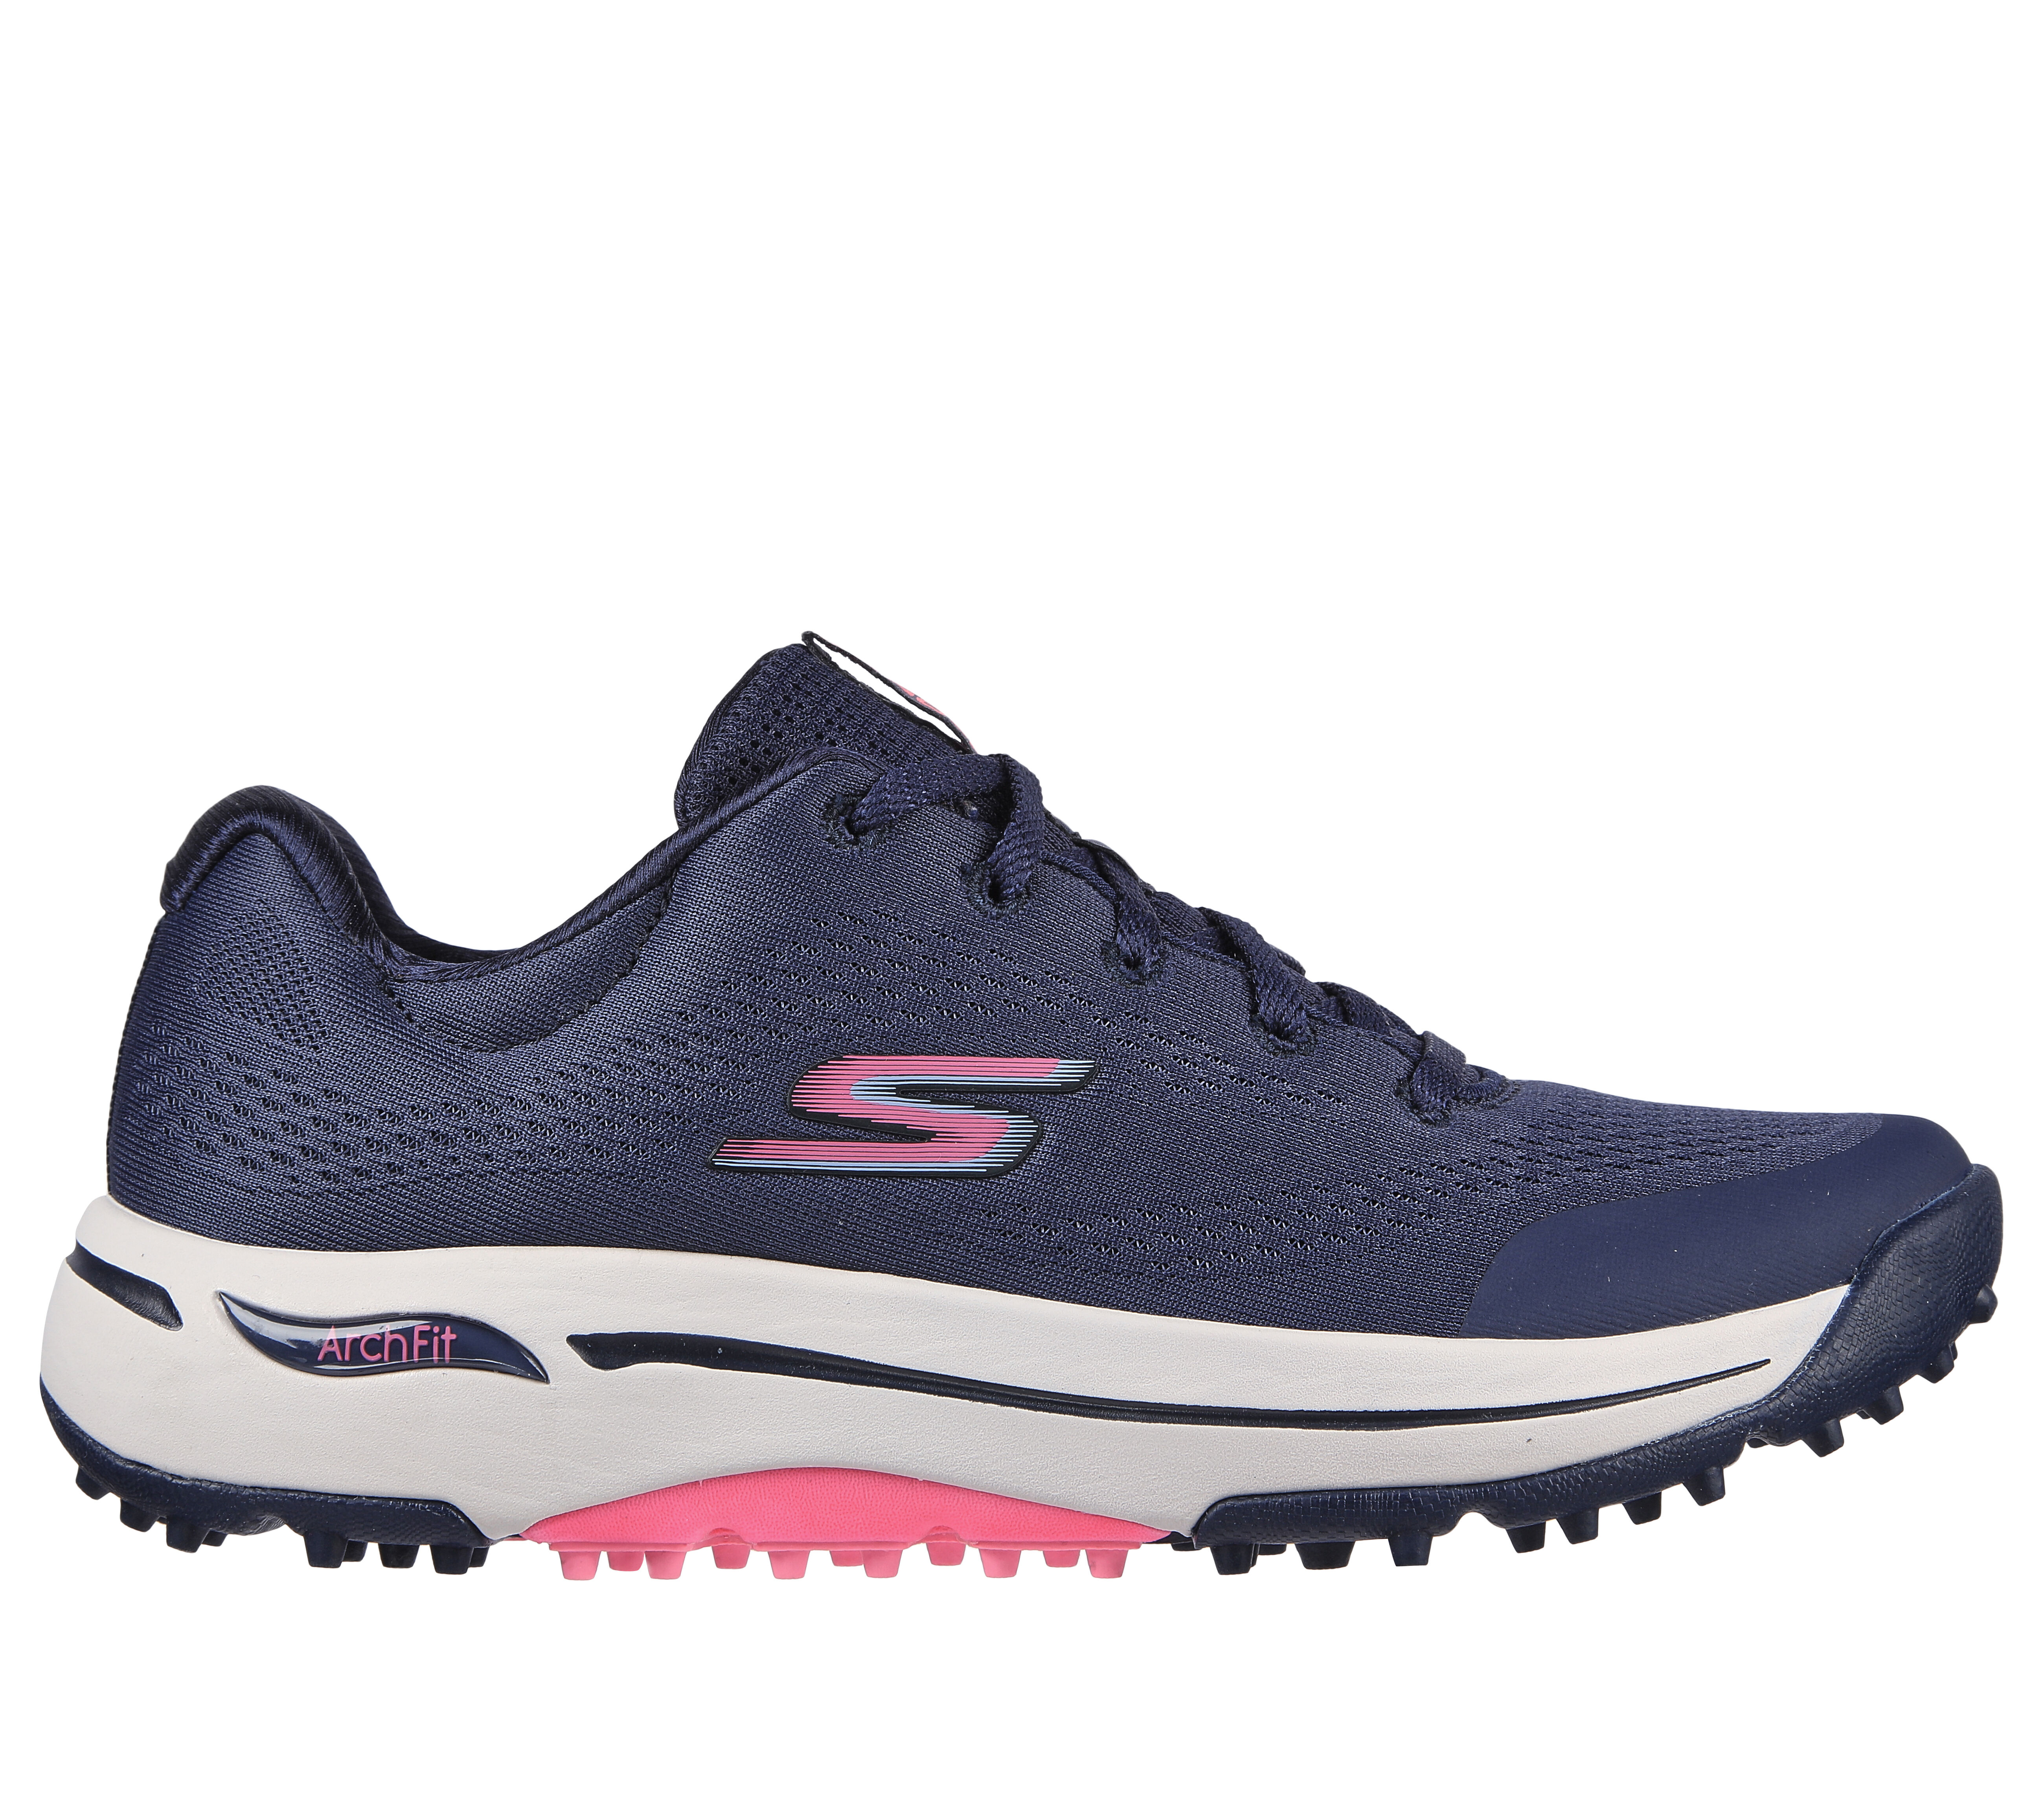 skechers golf shoes retail stores